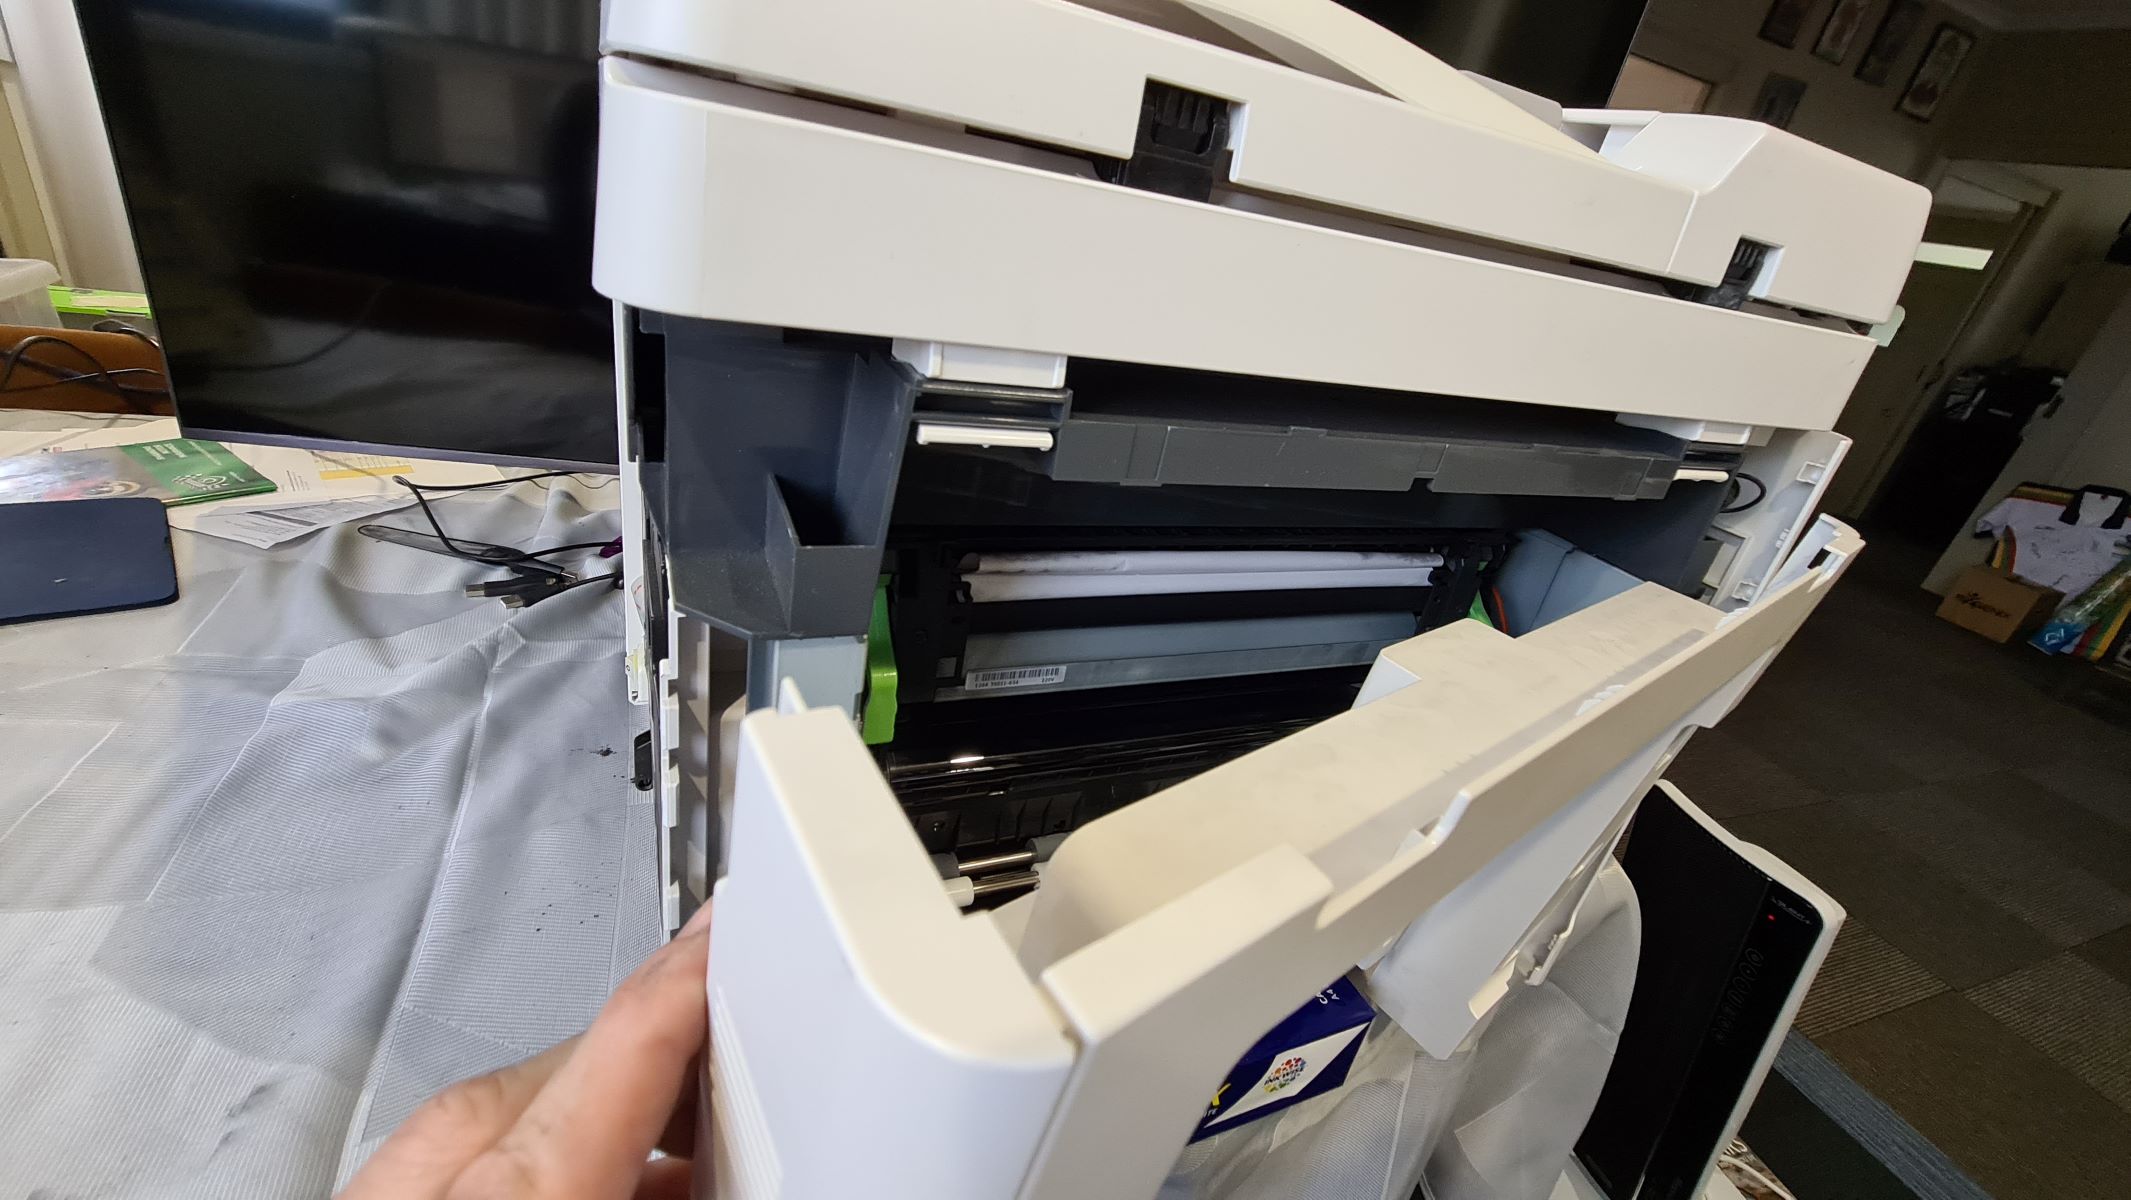 Why Is My Canon Printer Saying Paper Jam But There Is No Jammed Paper?